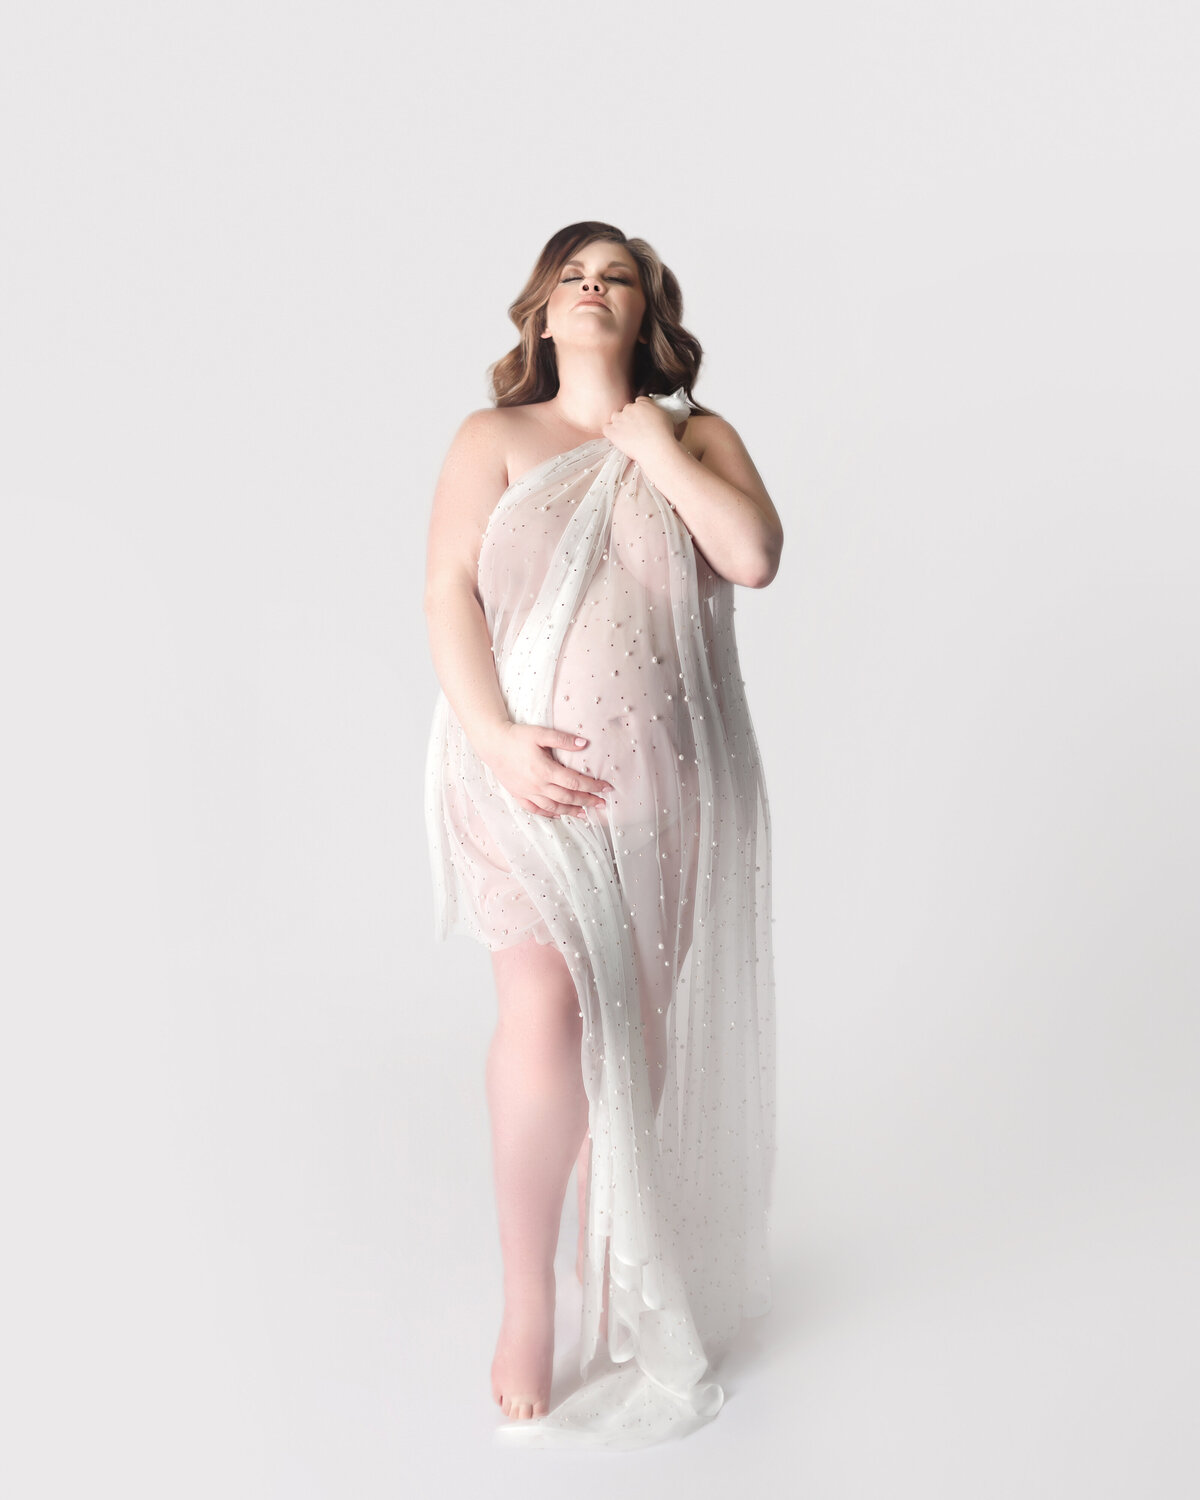 Pregnant women with white fabric draped over body during maternity photoshoot in Franklin Tennessee photography studio